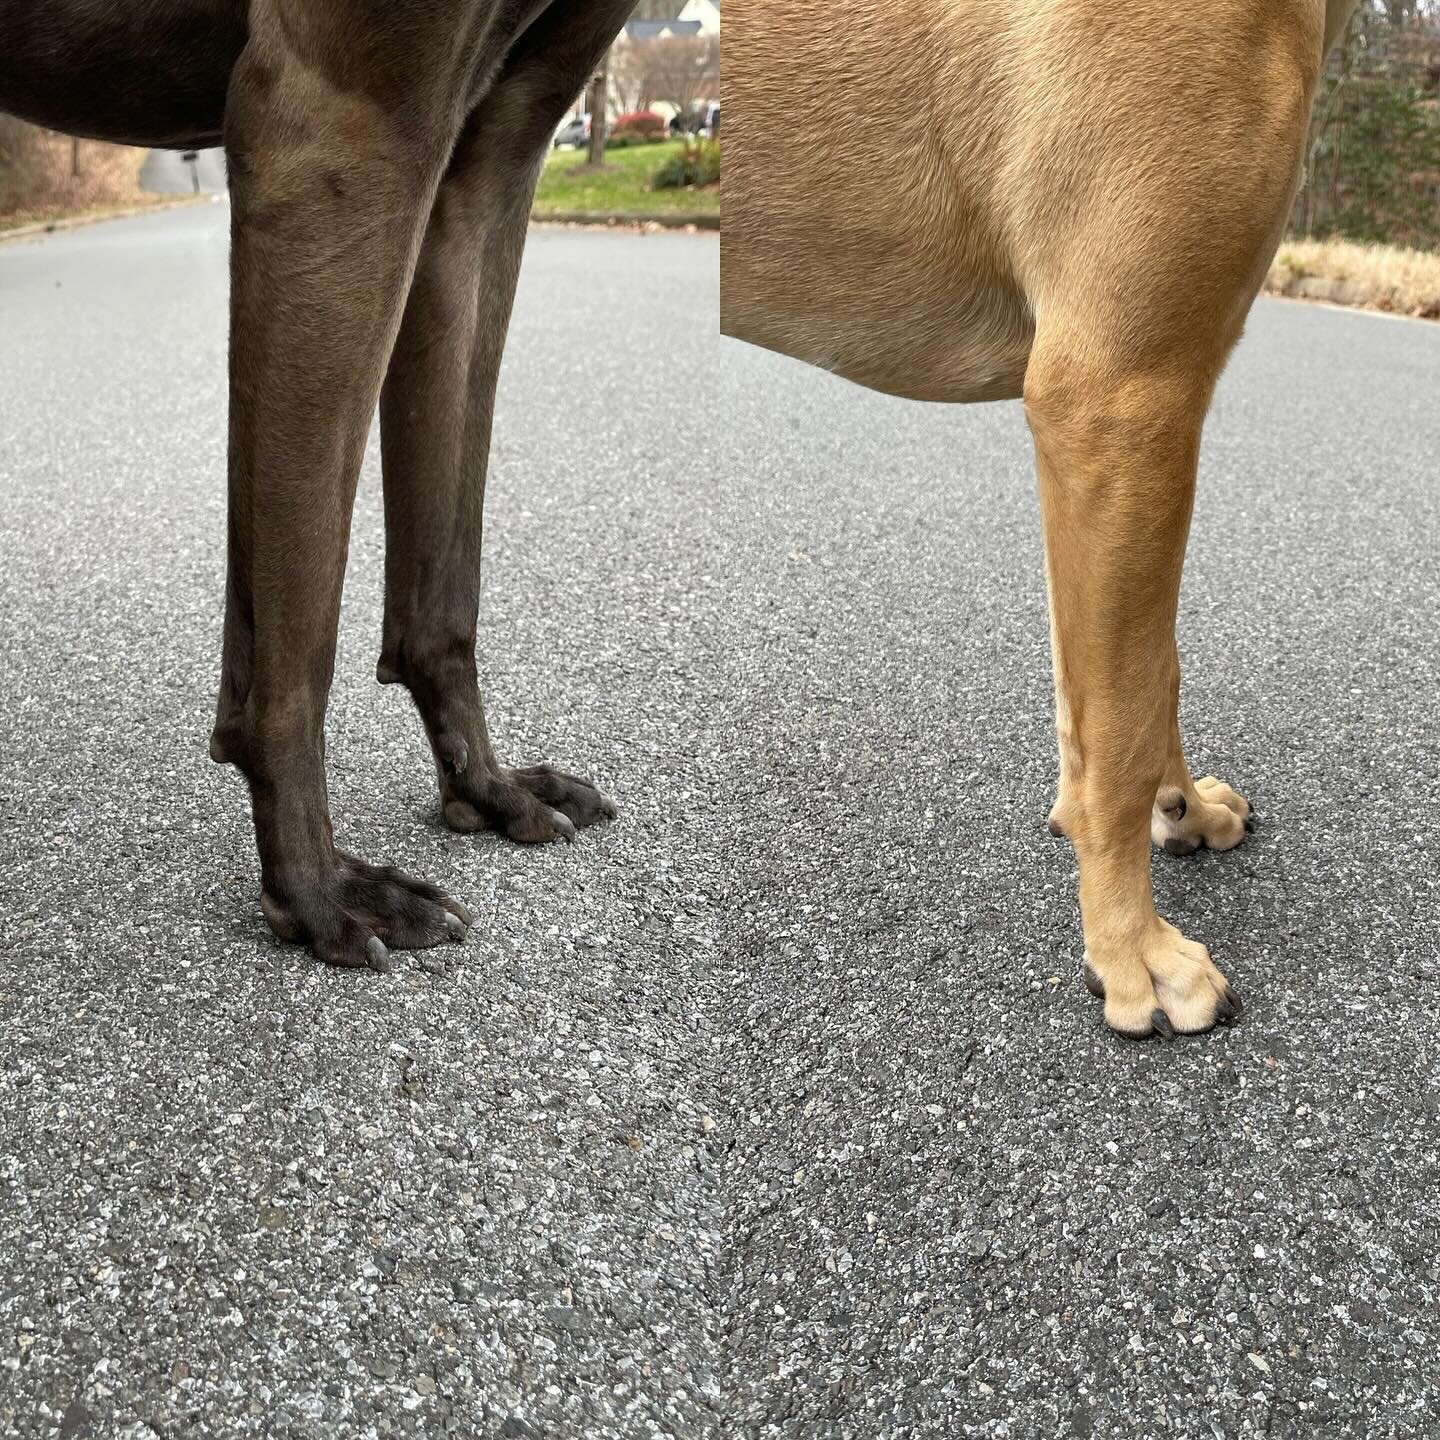 No Foot No Dog
.
The &ldquo;Savant Alaunt&rdquo; - is a breed type in progress. If form truly follows function - I need to prioritize building a dog from the ground up. 

Nero - with a flat hare foot on the left 
Uzi - with compact and elongated midd